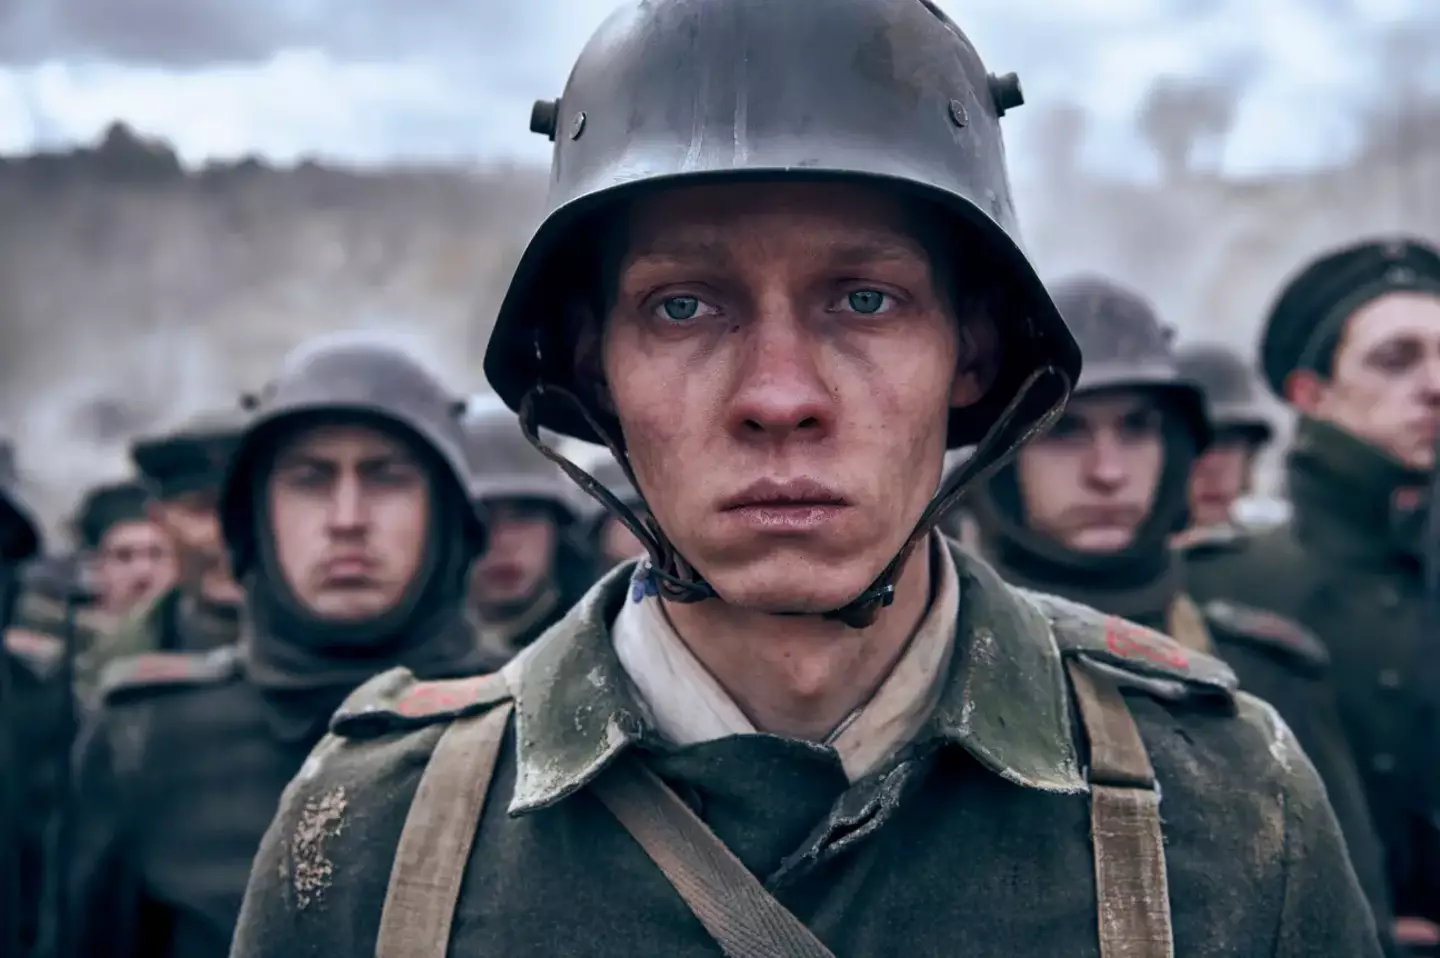 All Quiet on the Western Front follows the gripping account of a 17-year-old German soldier on the Western Front of World War I.